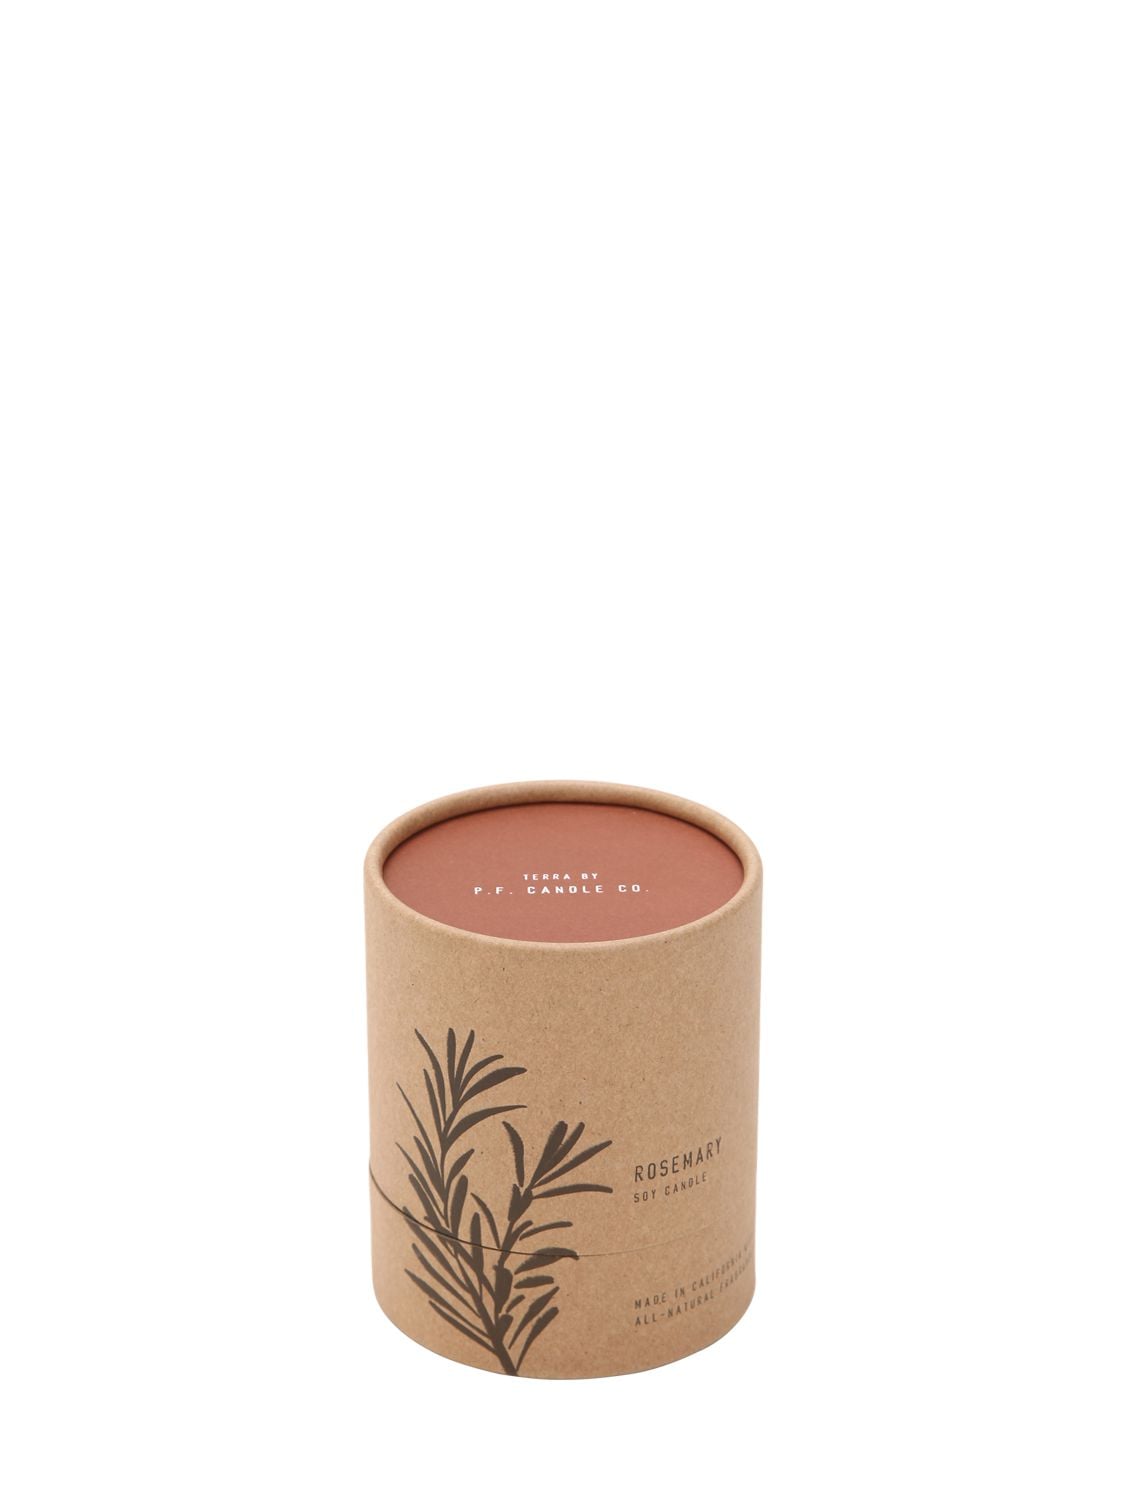 P.f.candle Co. No. 05 Rosemary Terra Small Candle In Orange